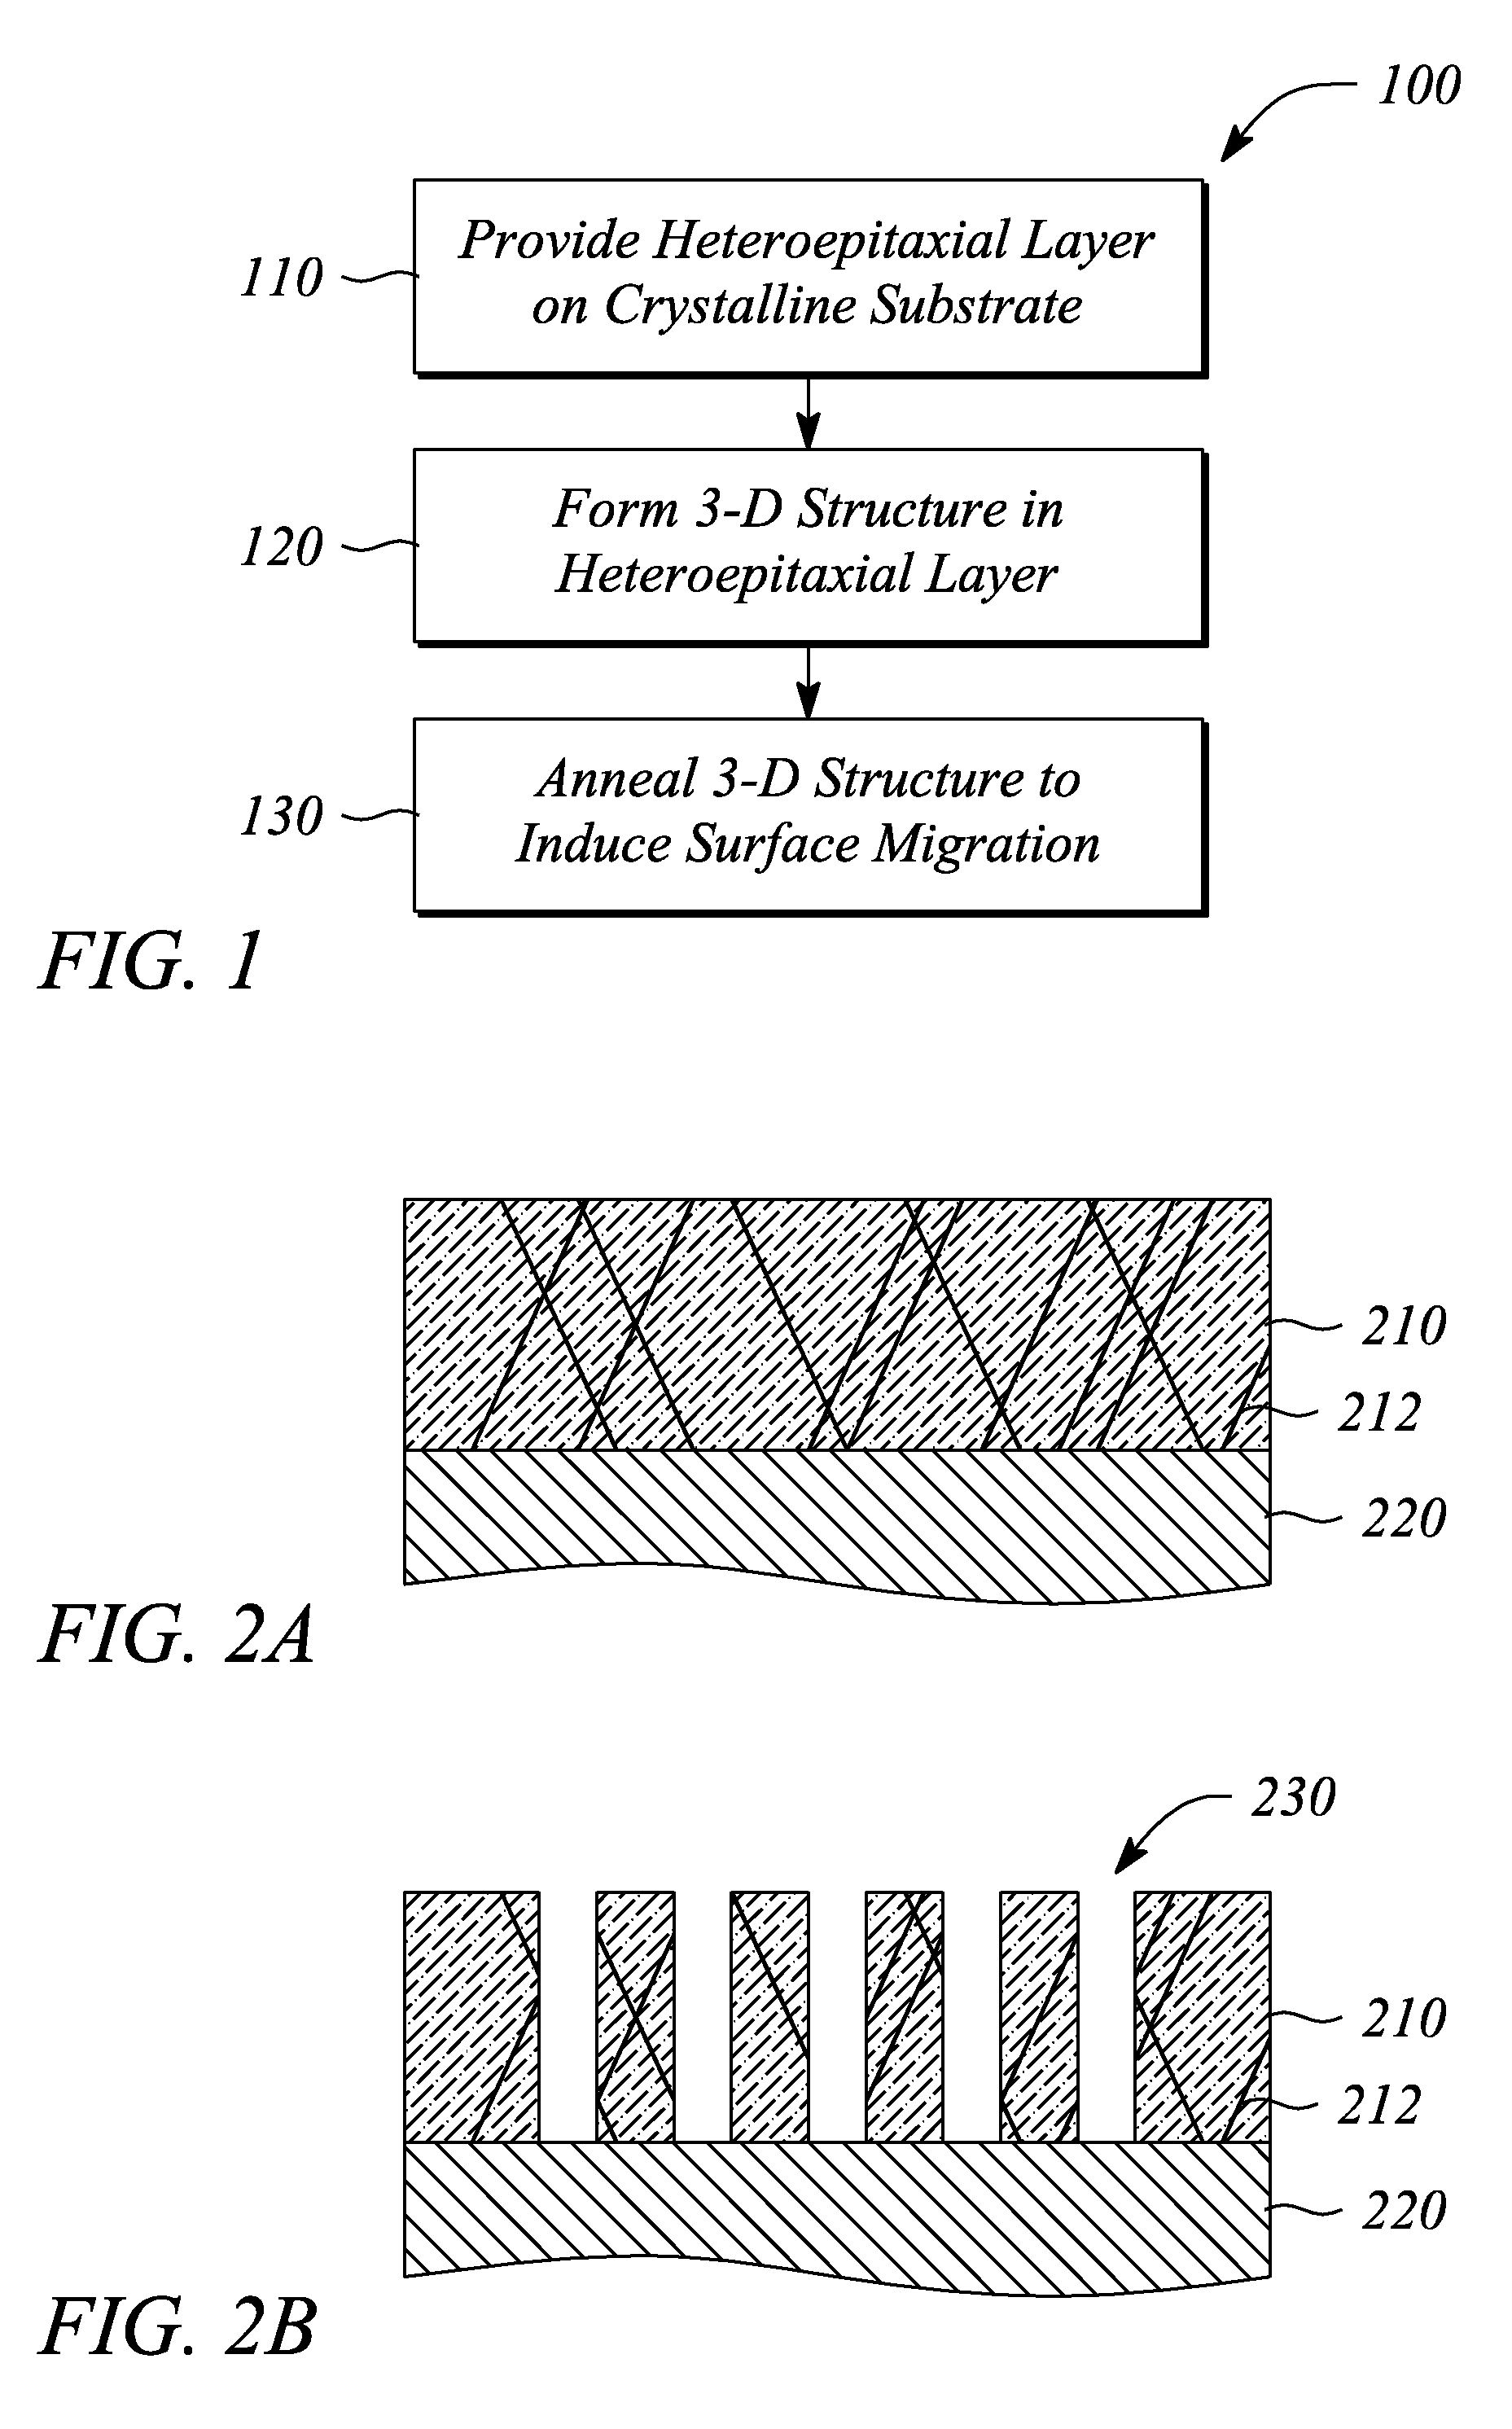 Suspended mono-crystalline structure and method of fabrication from a heteroepitaxial layer